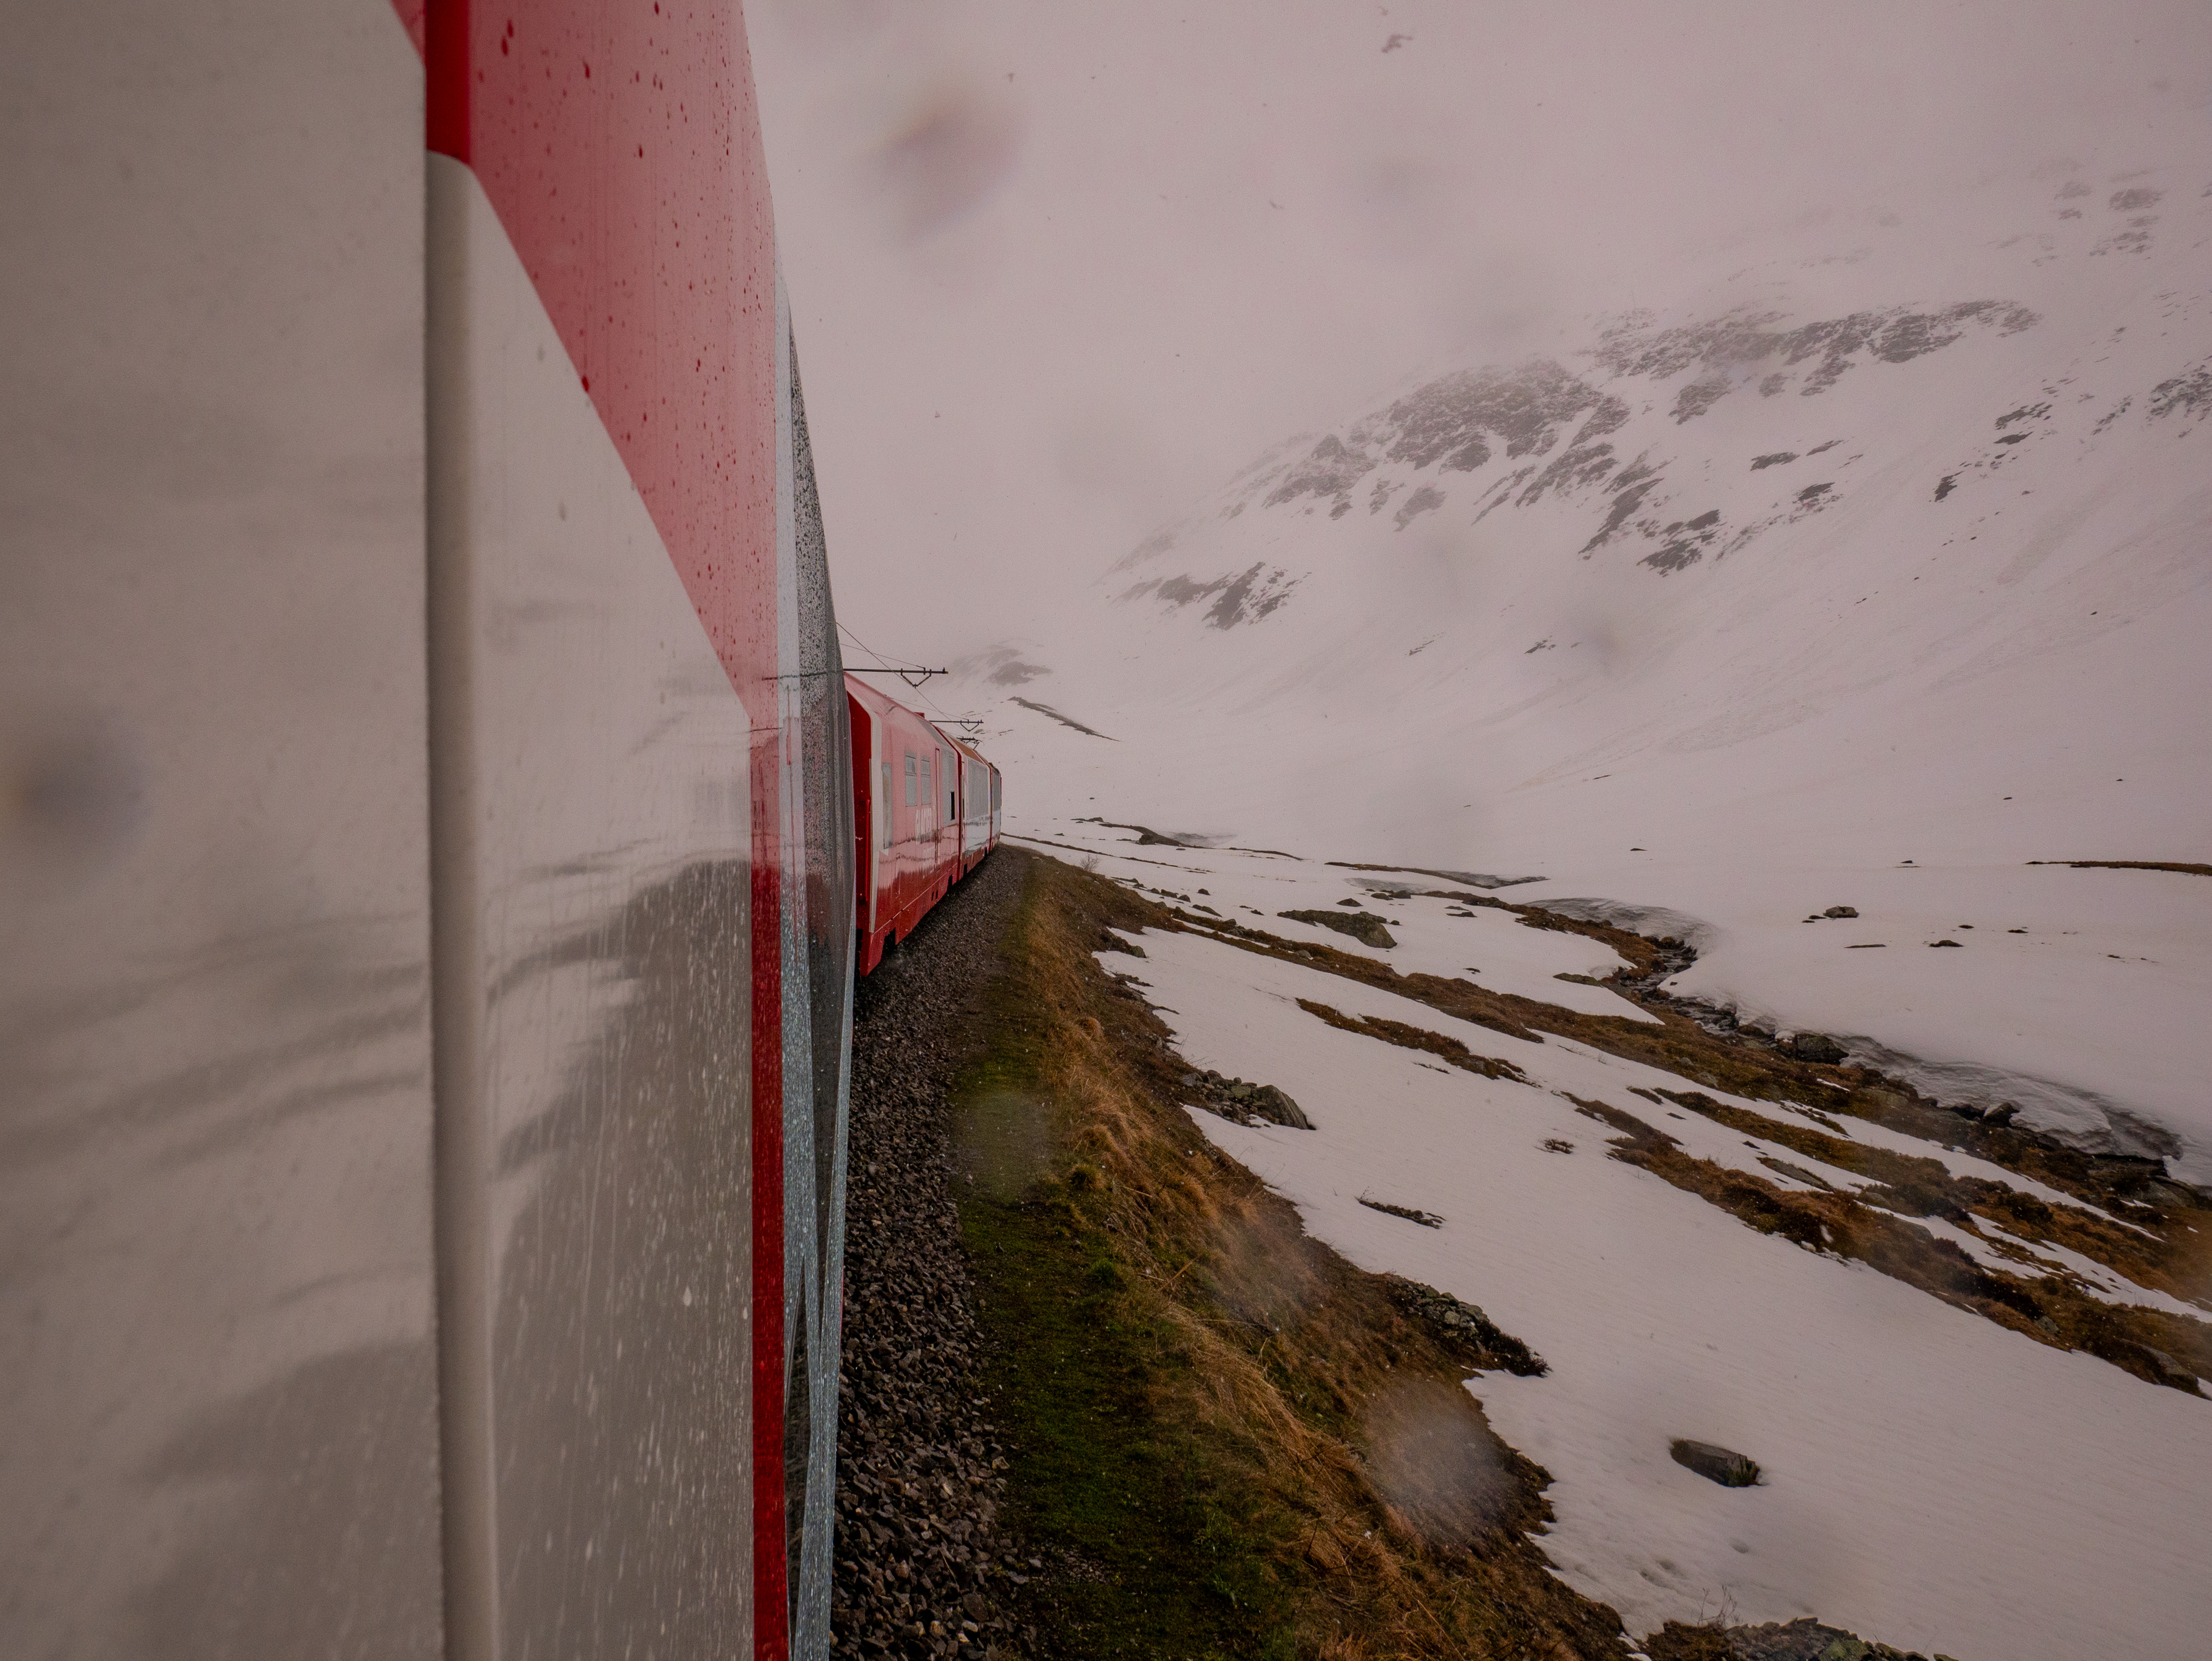 Glacier Express panoramic train travelling through the Swiss Alps